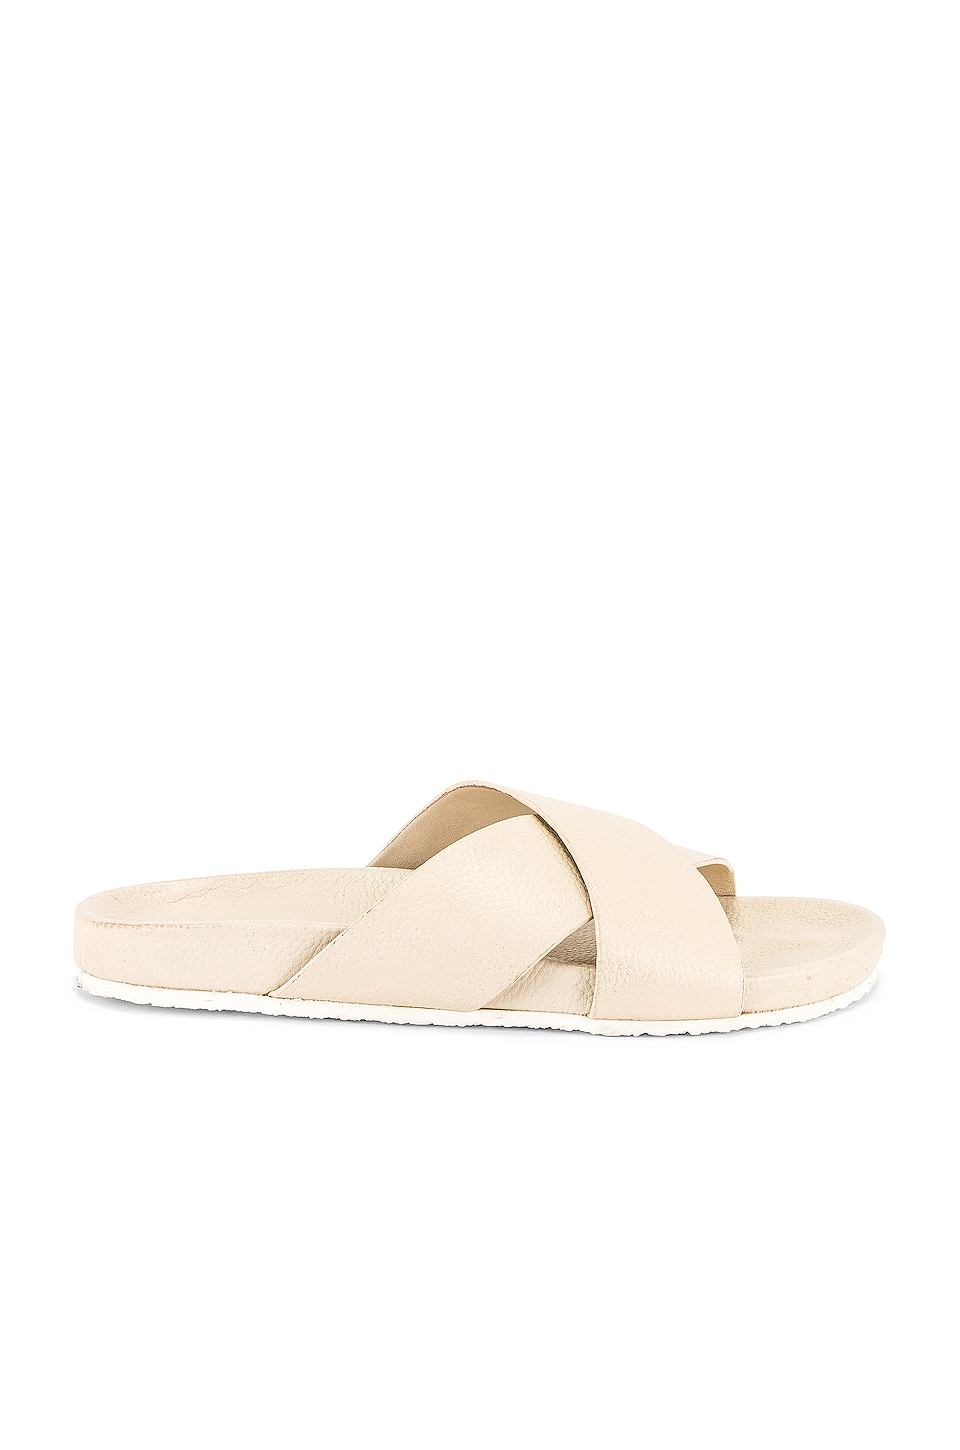 Image 1 of Lighthearted Sandal in Off White